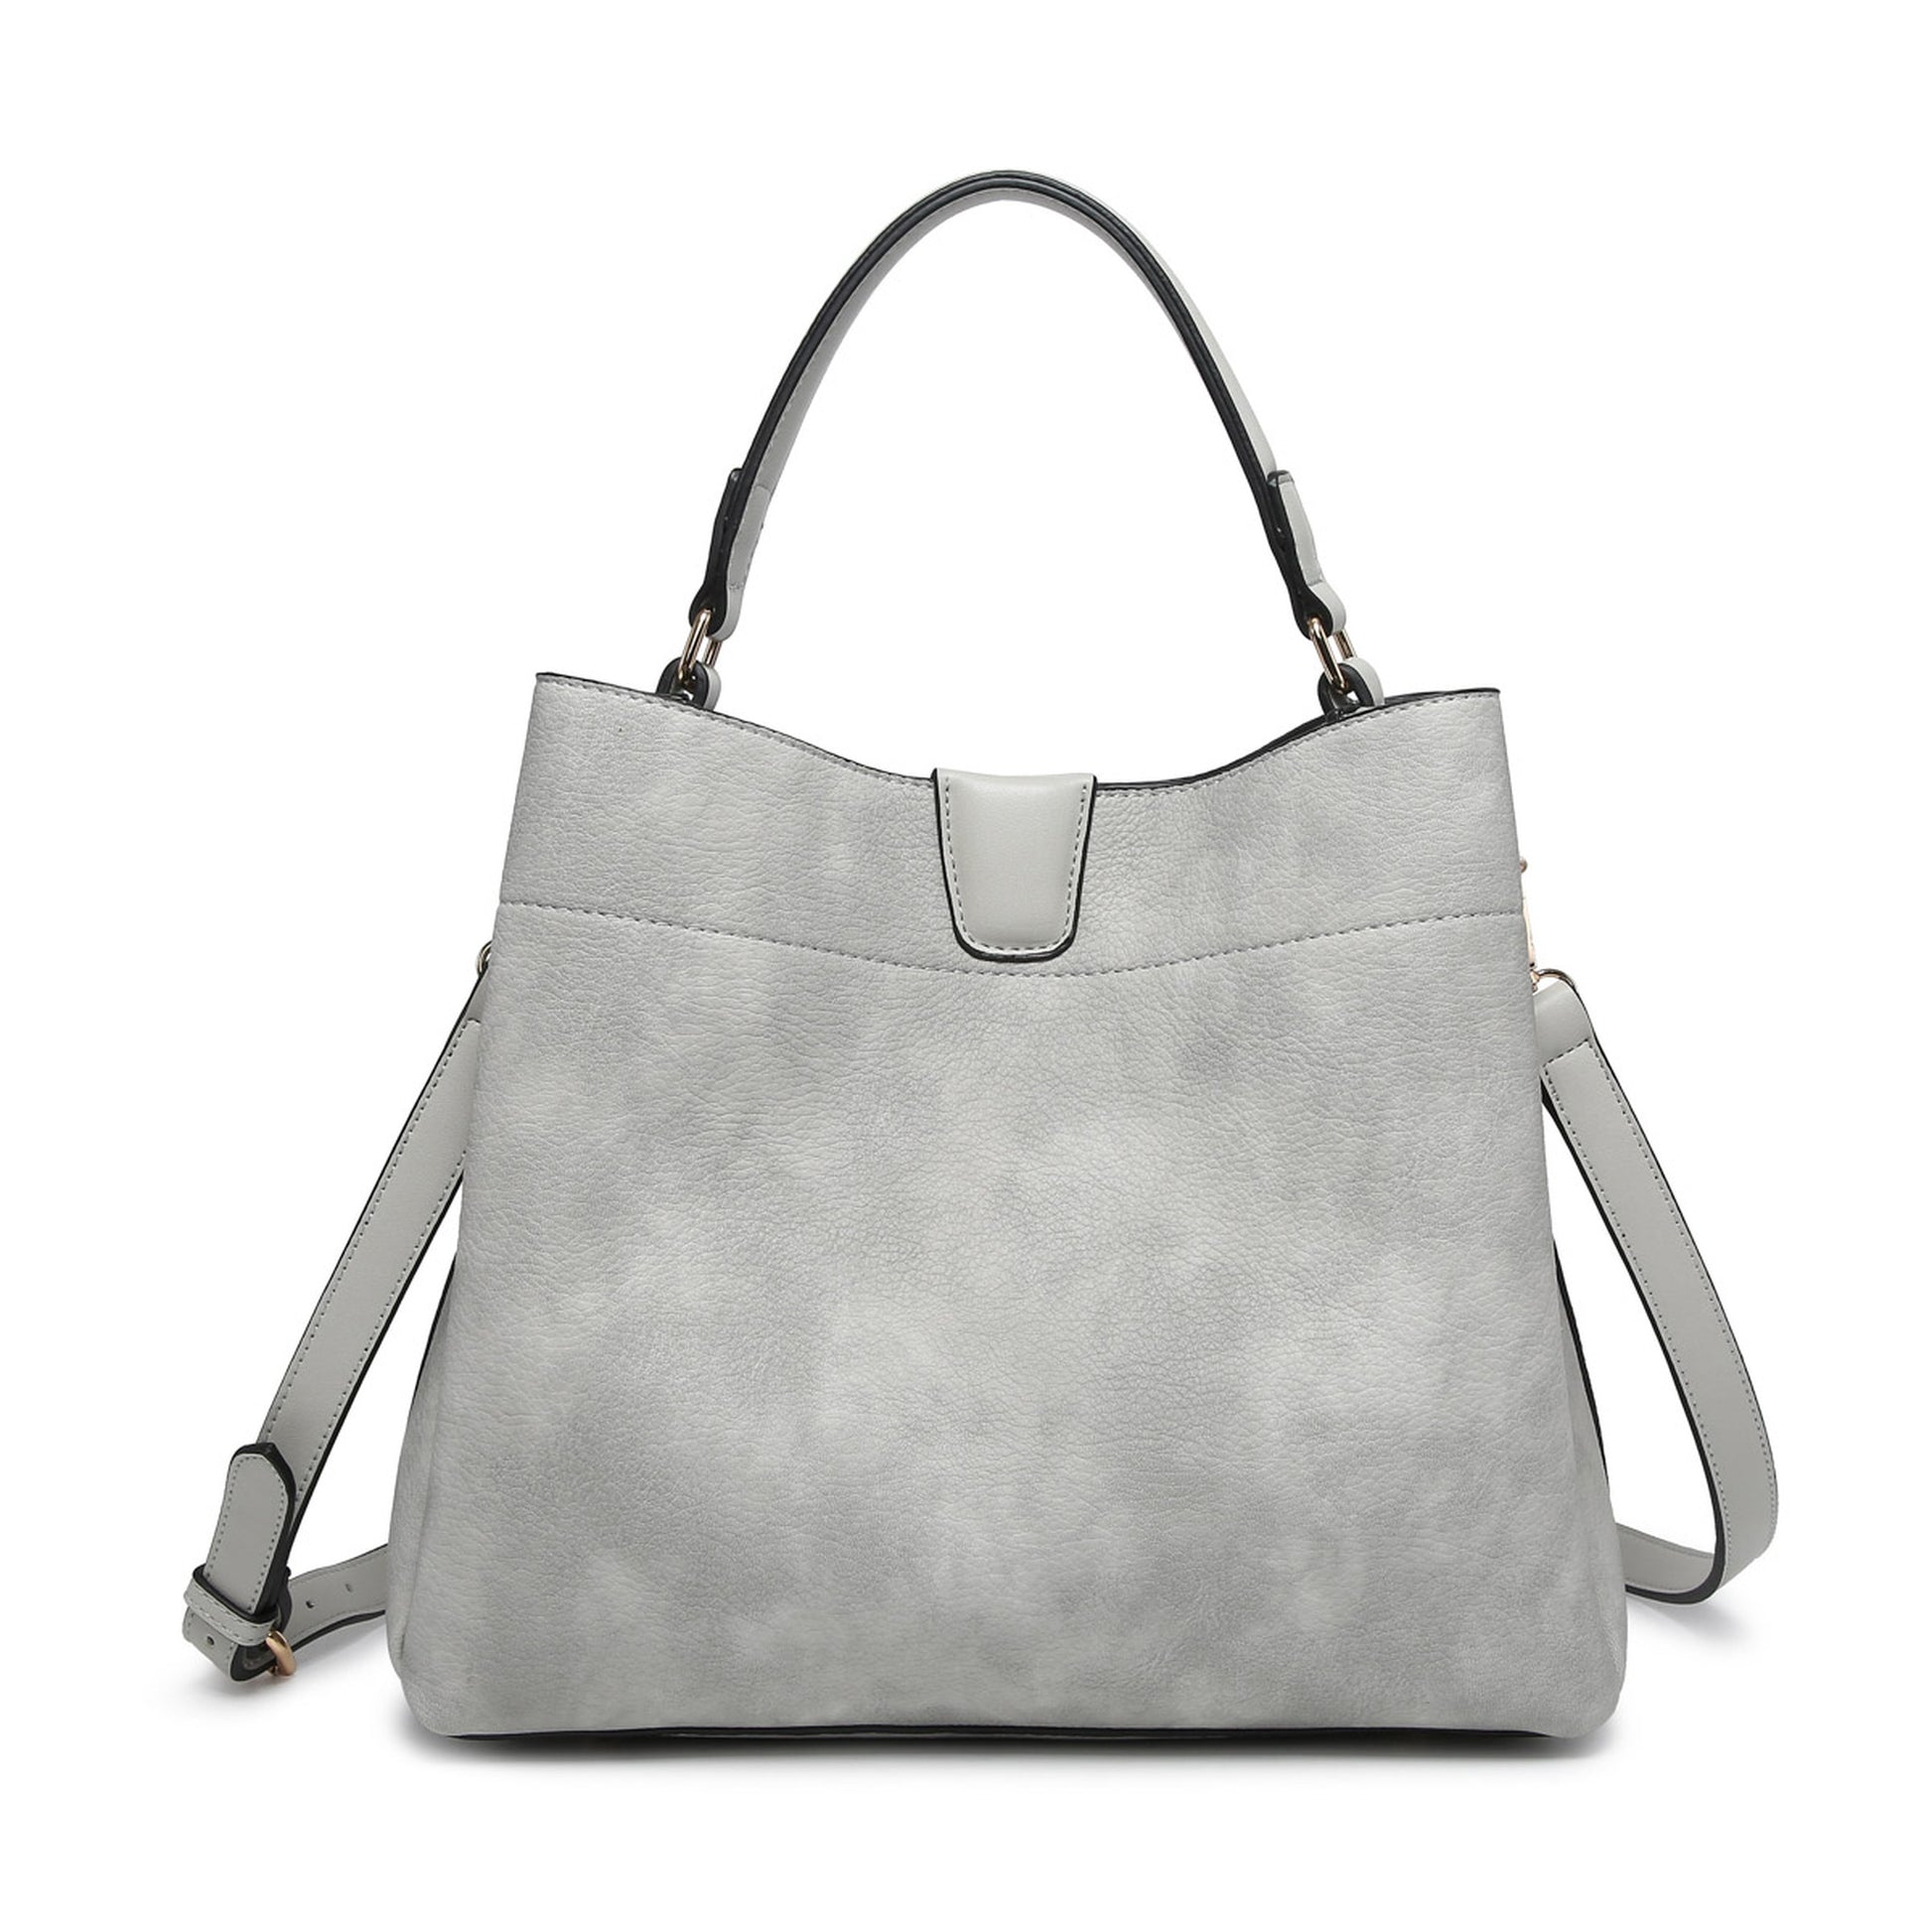 Making my way Downtown - Light Grey Satchel (monogramable) - Southern Grace Creations